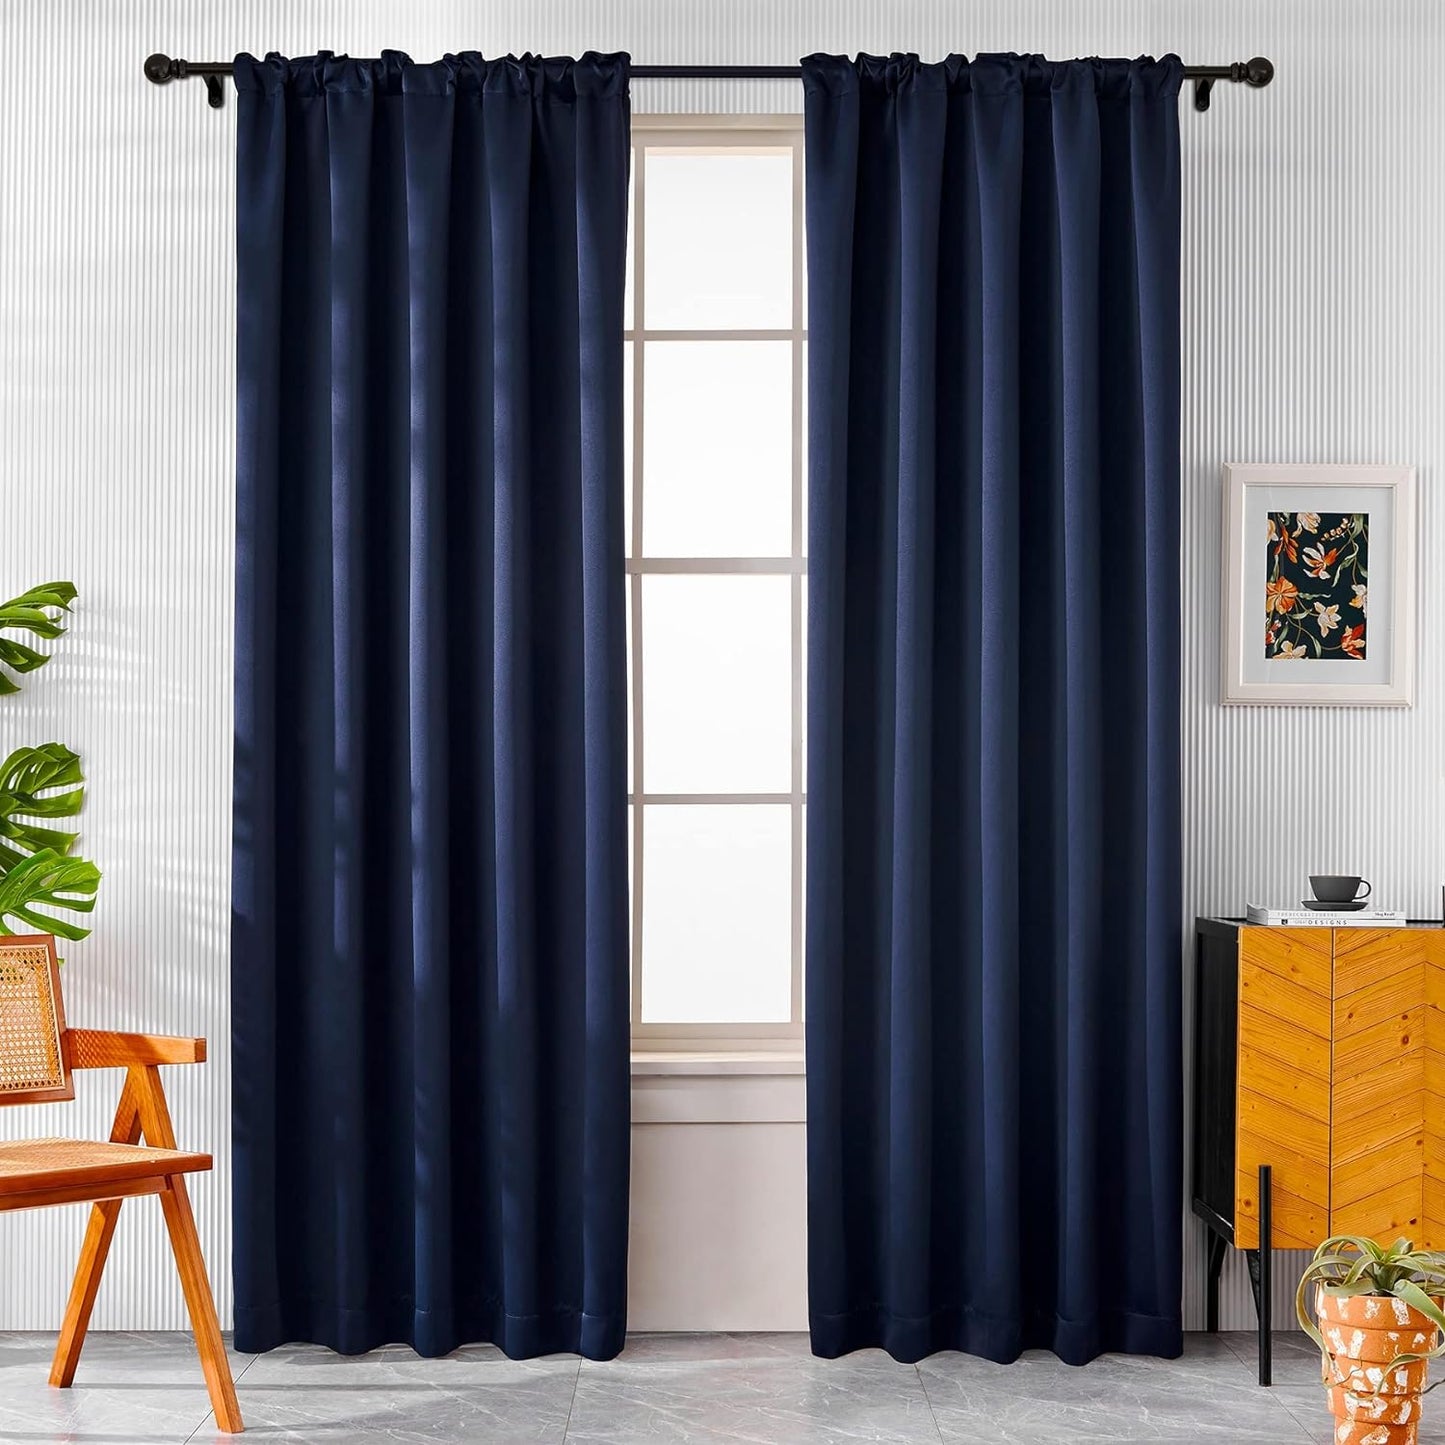 Pickluc Blackout Curtains 96 Inches Long 2 Panels, Black Out Drapes for Bedroom or Living Room, Back Tab and Rod Pocket Top, Set of Two, Dark Grey, 52" Wide and 96" Length.  Pickluc Navy 52"W X 96"L 